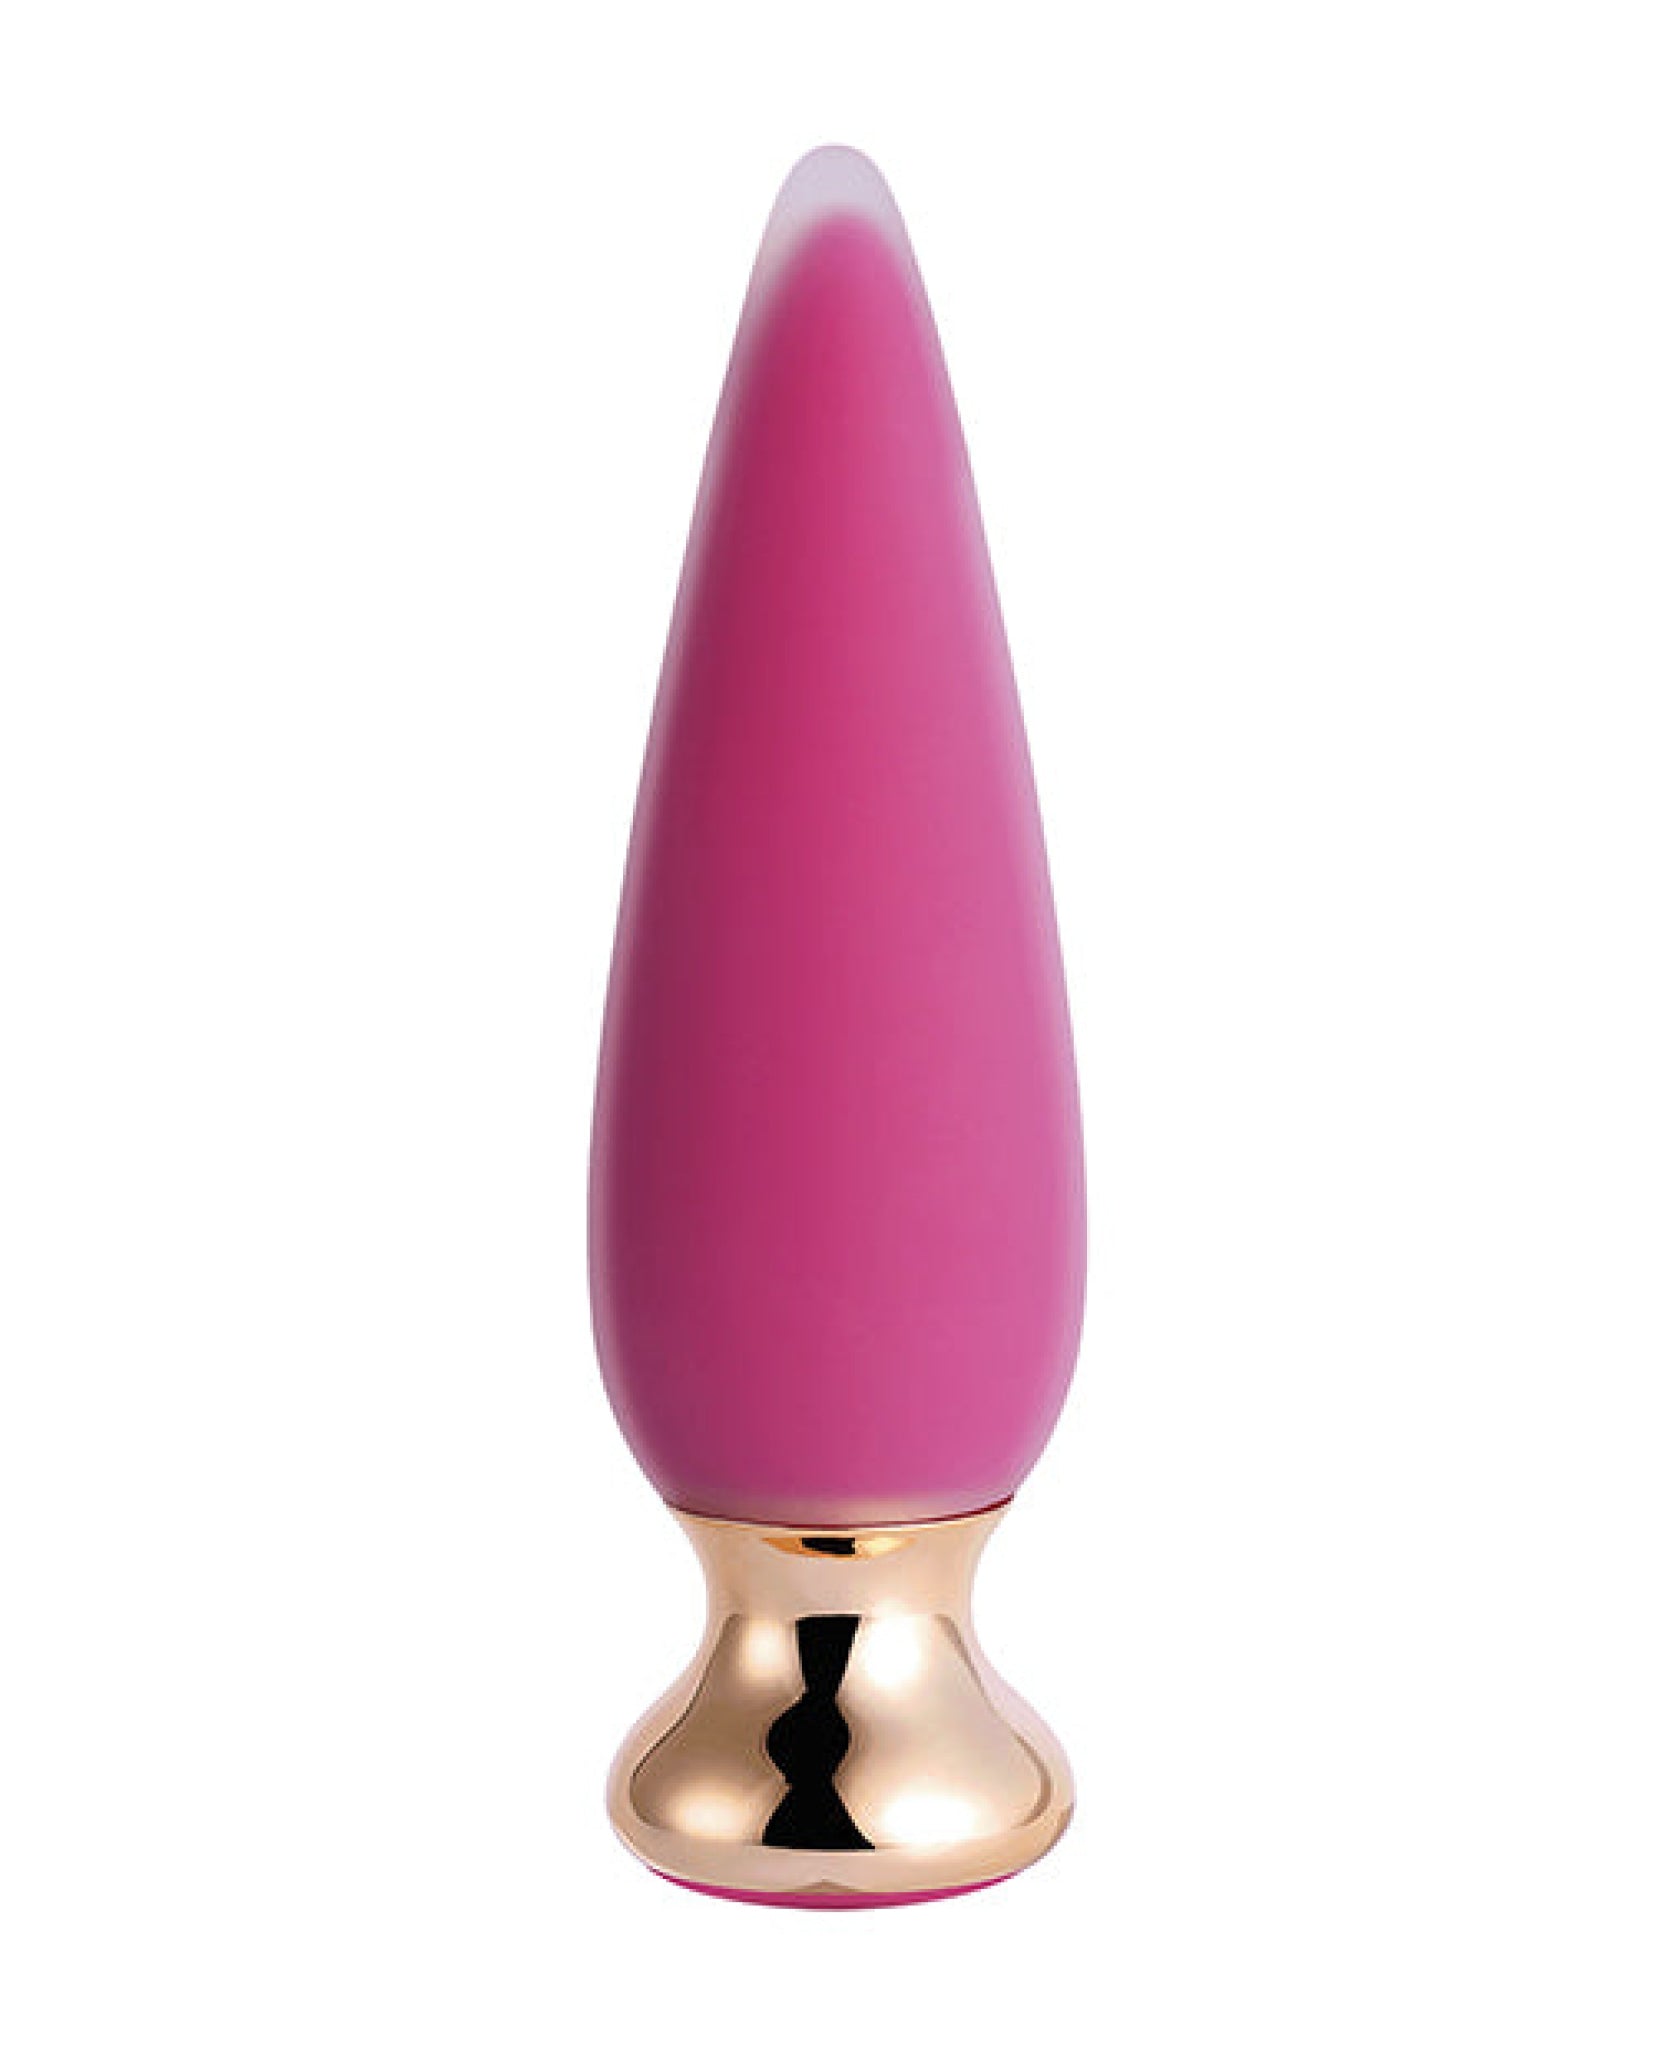 Doro Plus Vibrating Anal Plug With Remote Control - Pink Uc Global Trade